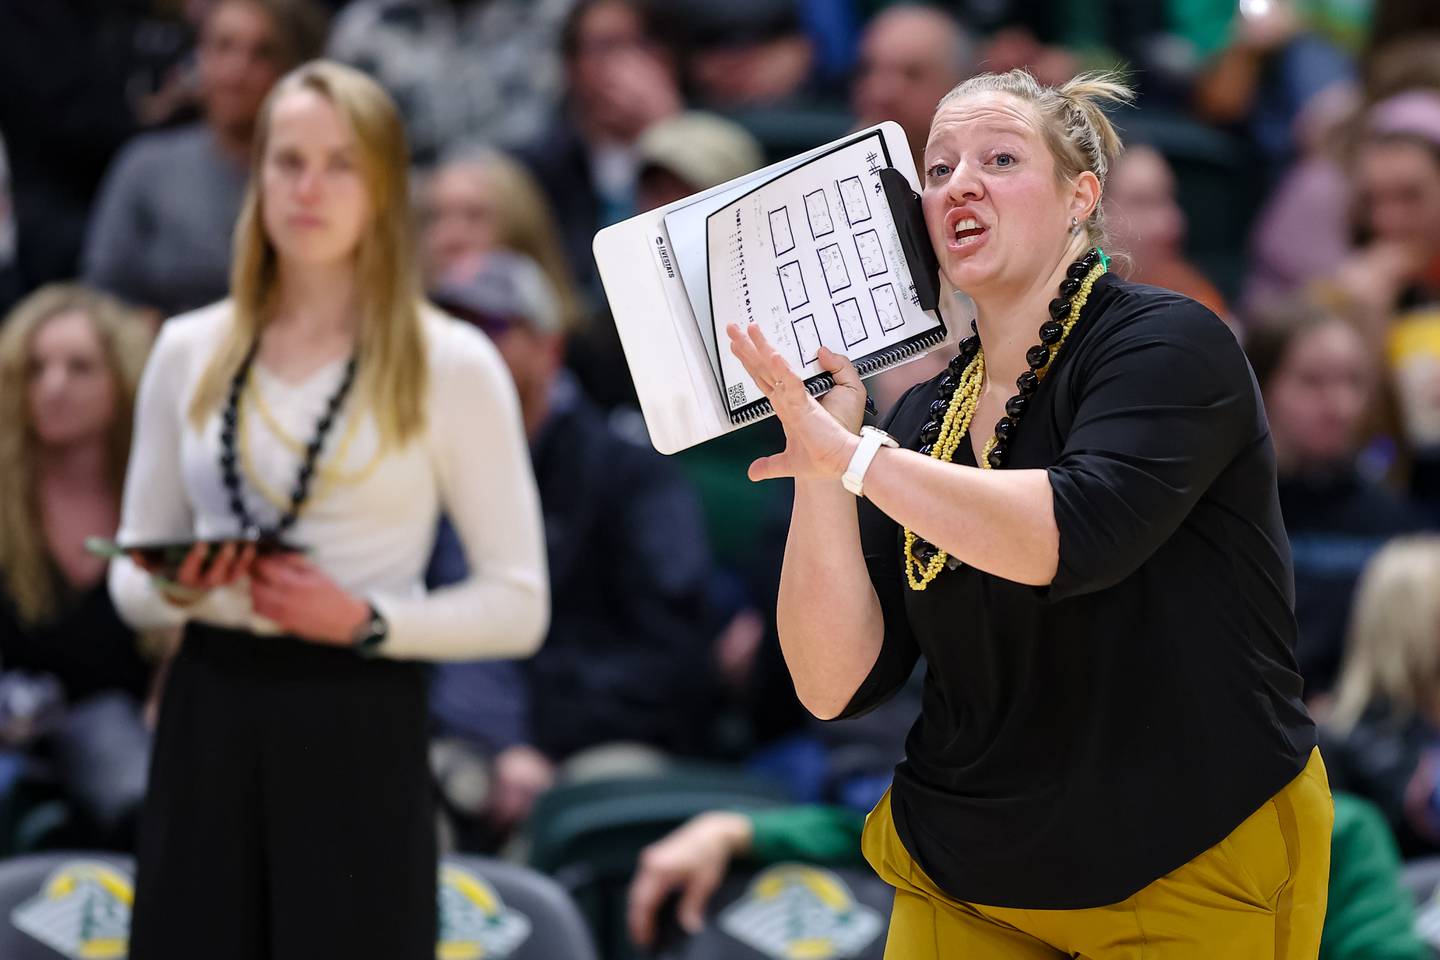 UAA assistant coach Stacie Meisner instructs players during a UAA volleyball match against Central Washington University on Nov. 5, 2022